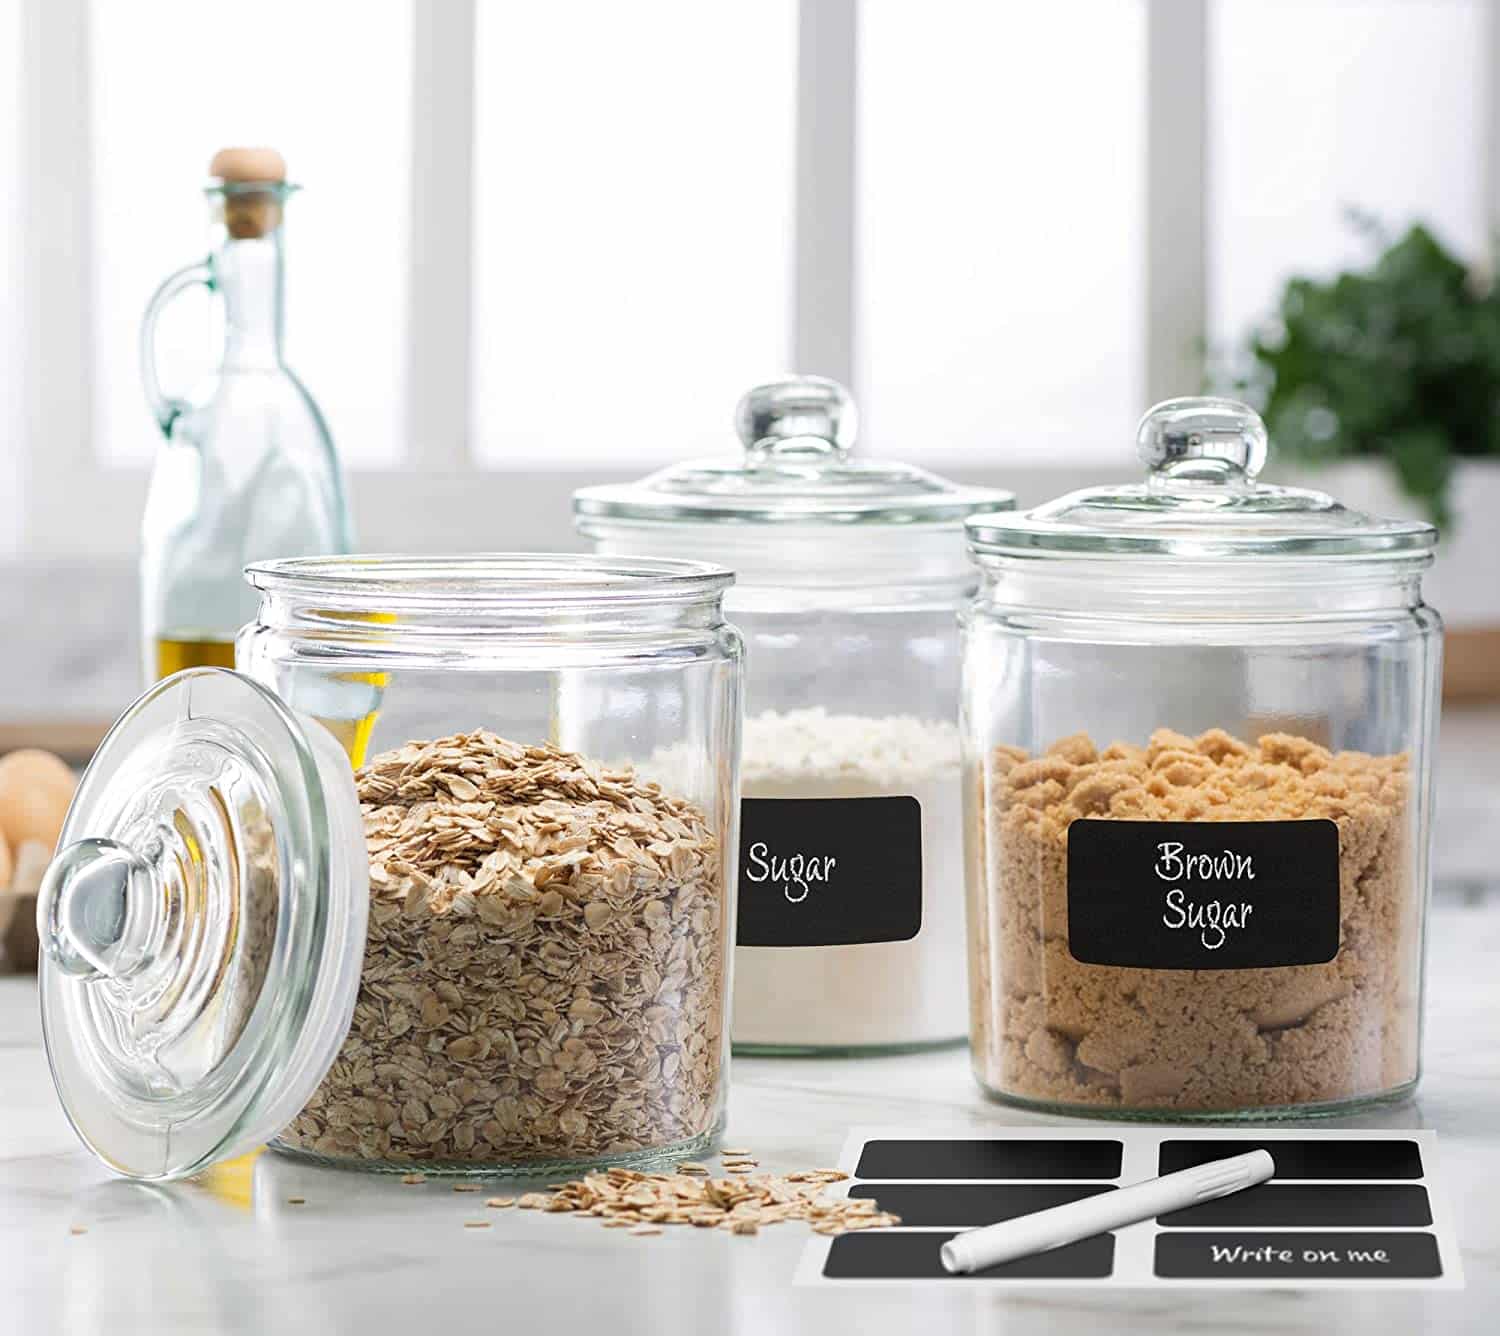 3pc Canister Sets for Kitchen Counter + Labels & Marker - Glass Cookie Jars with Airtight Lids - Food Storage Containers with Lids Airtight for Pantry - Flour, Sugar, Coffee, Cookies, Christmas gift